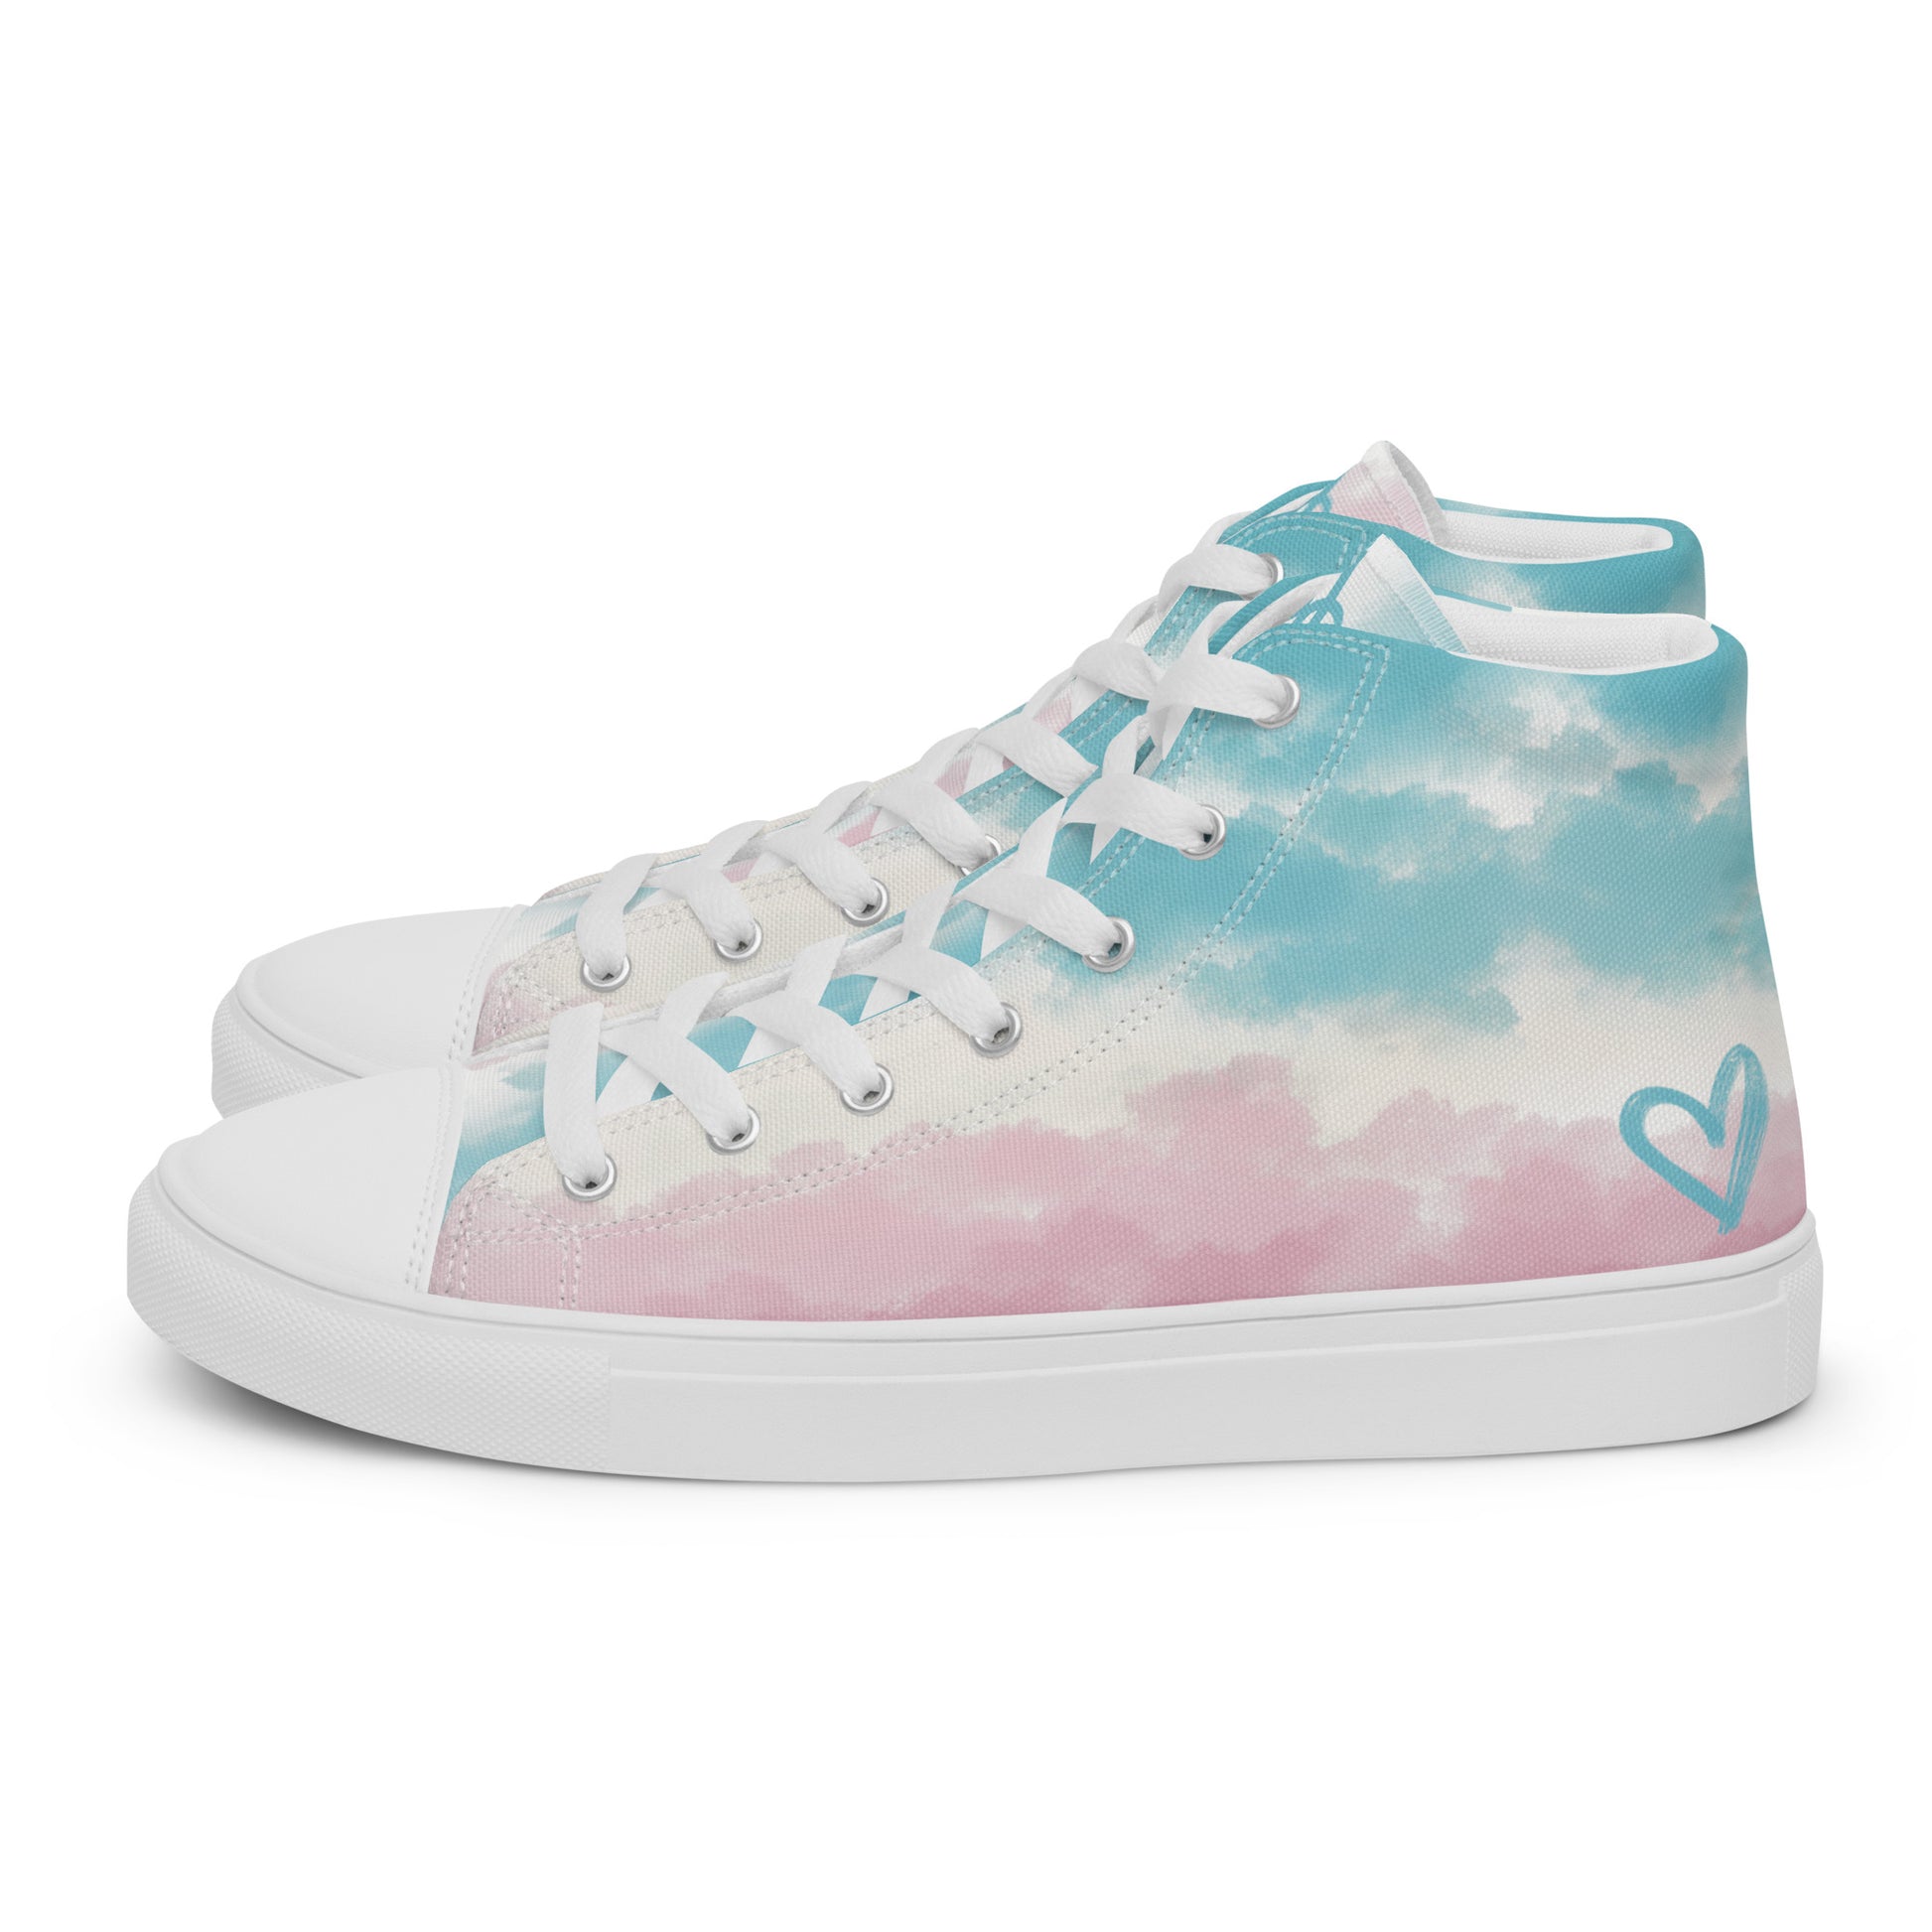 High top shoes with a cloudy design in blue, white, and pink has a doodle style heart on the heel, white shoe laces, and white details.